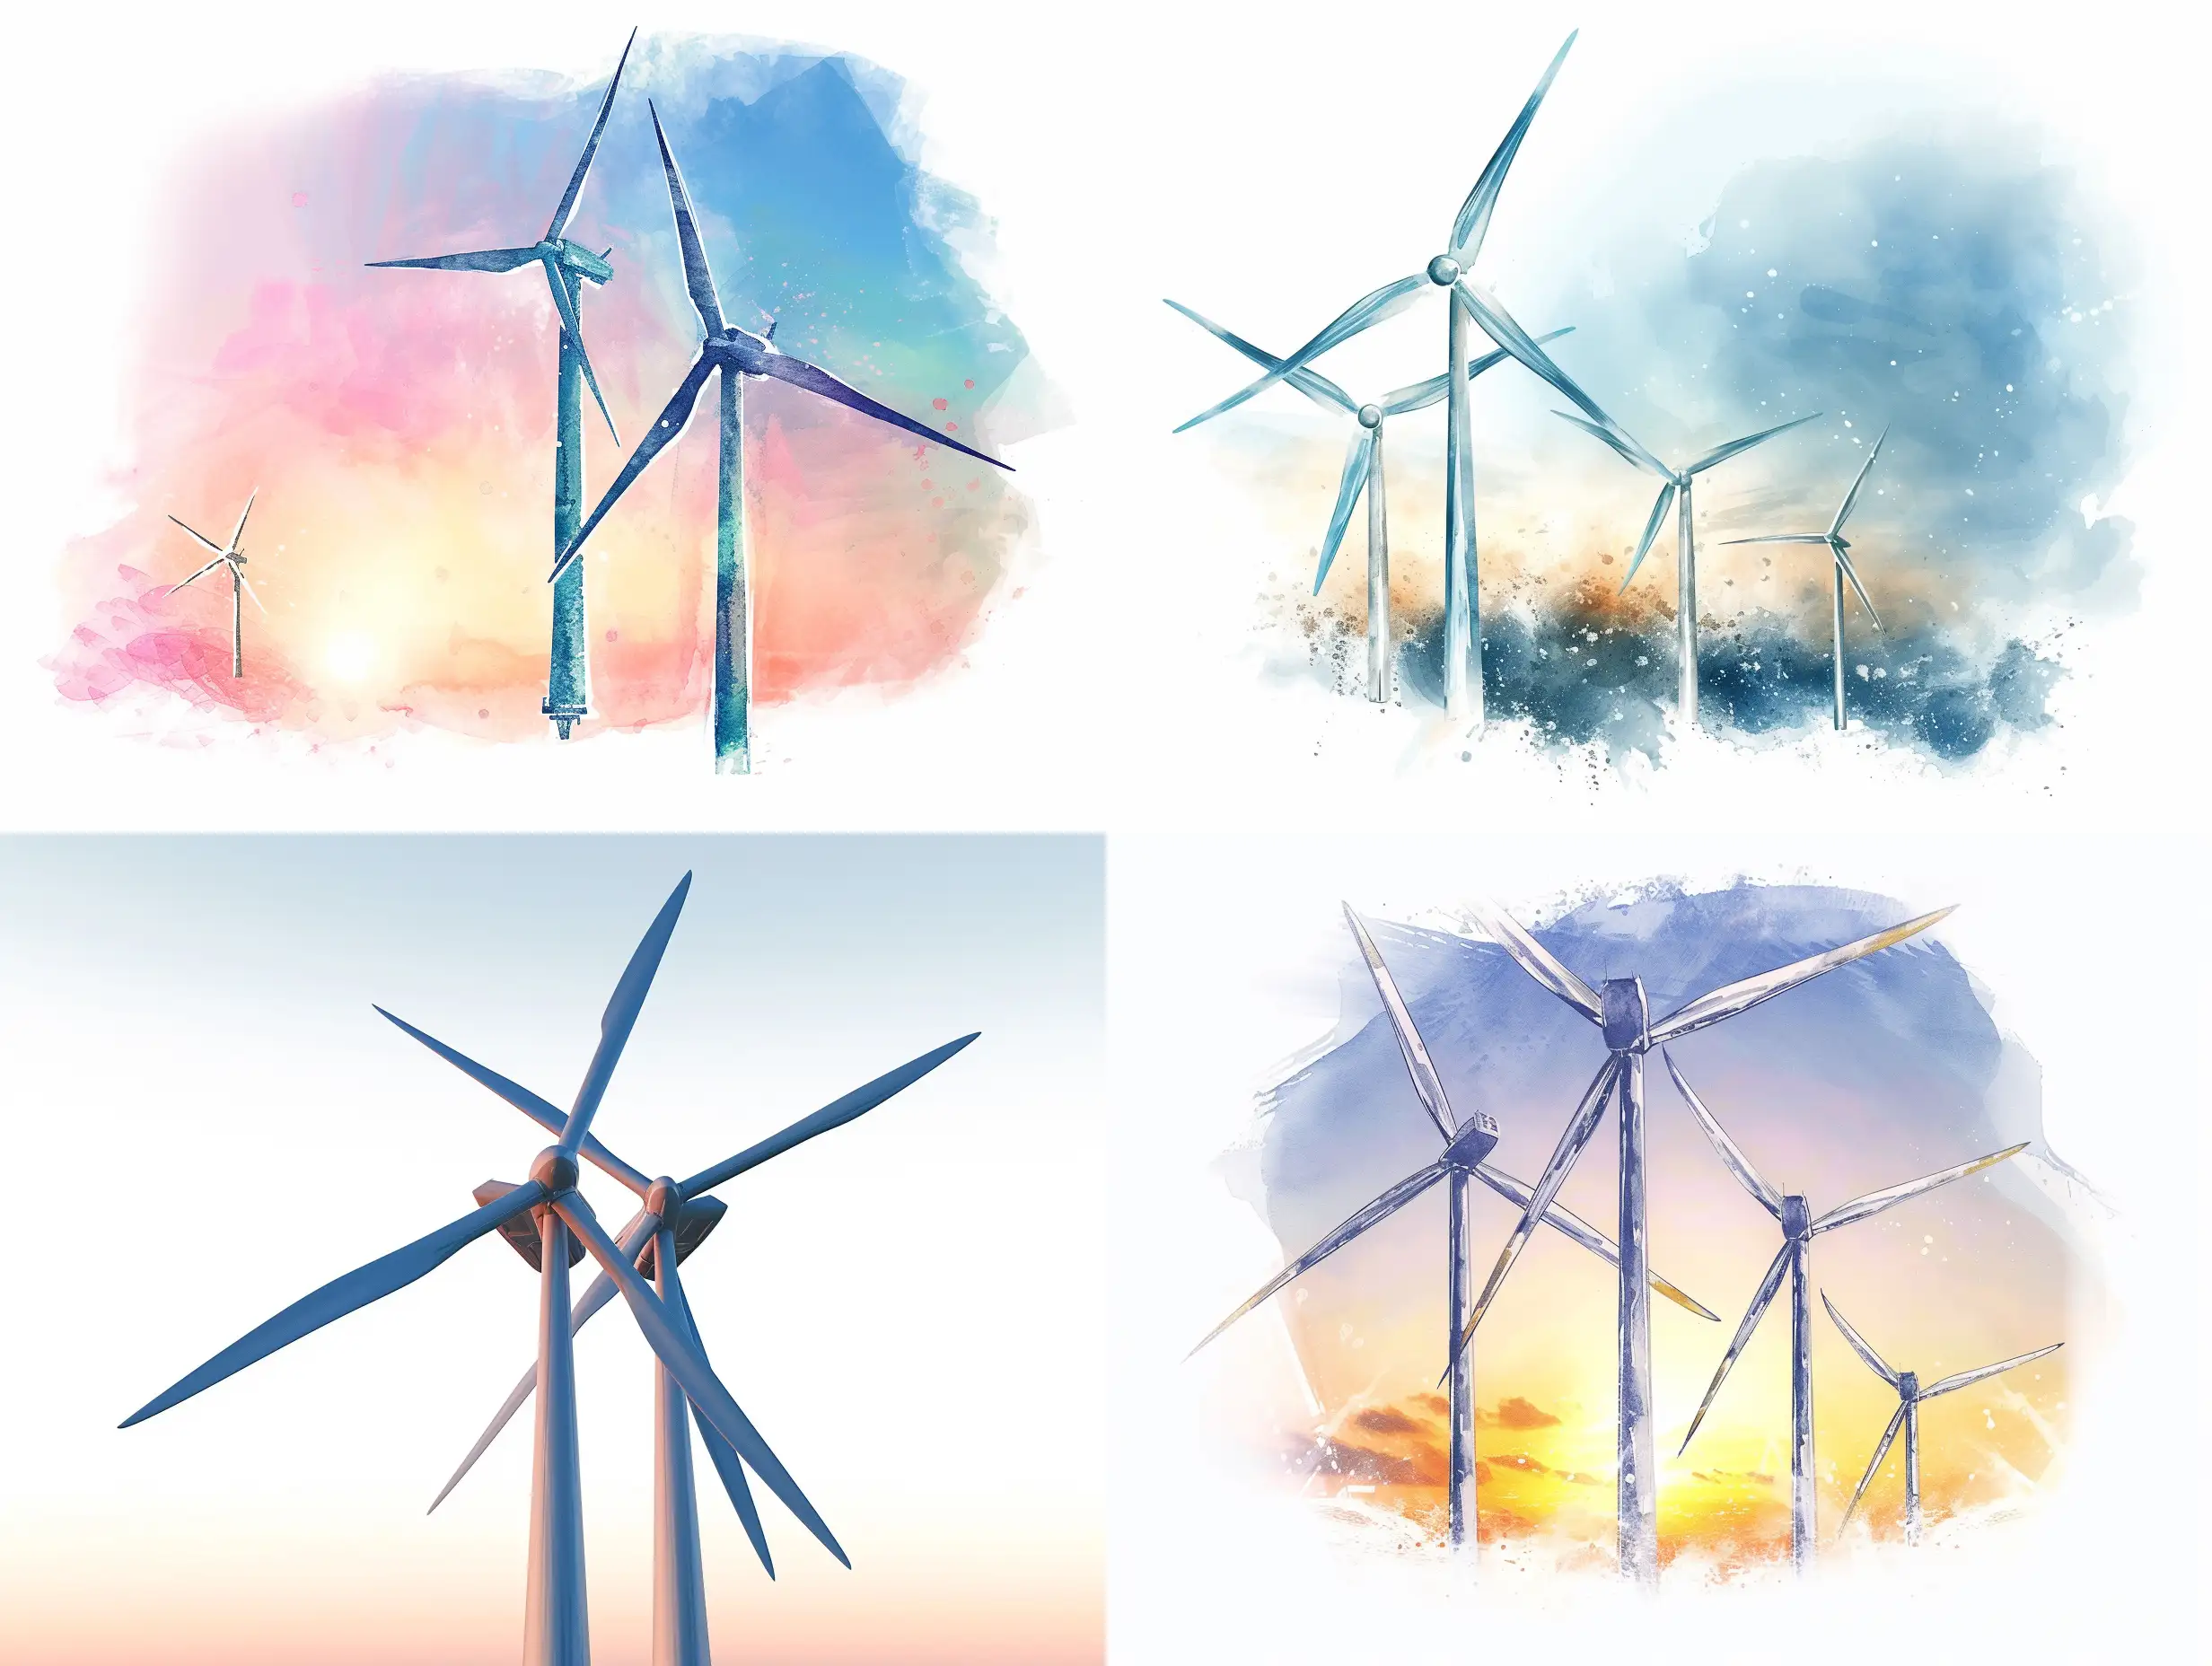 Elegant-Wind-Turbines-Silhouetted-Against-Dusk-Sky-Watercolor-Style-Art-by-Victo-Ngai